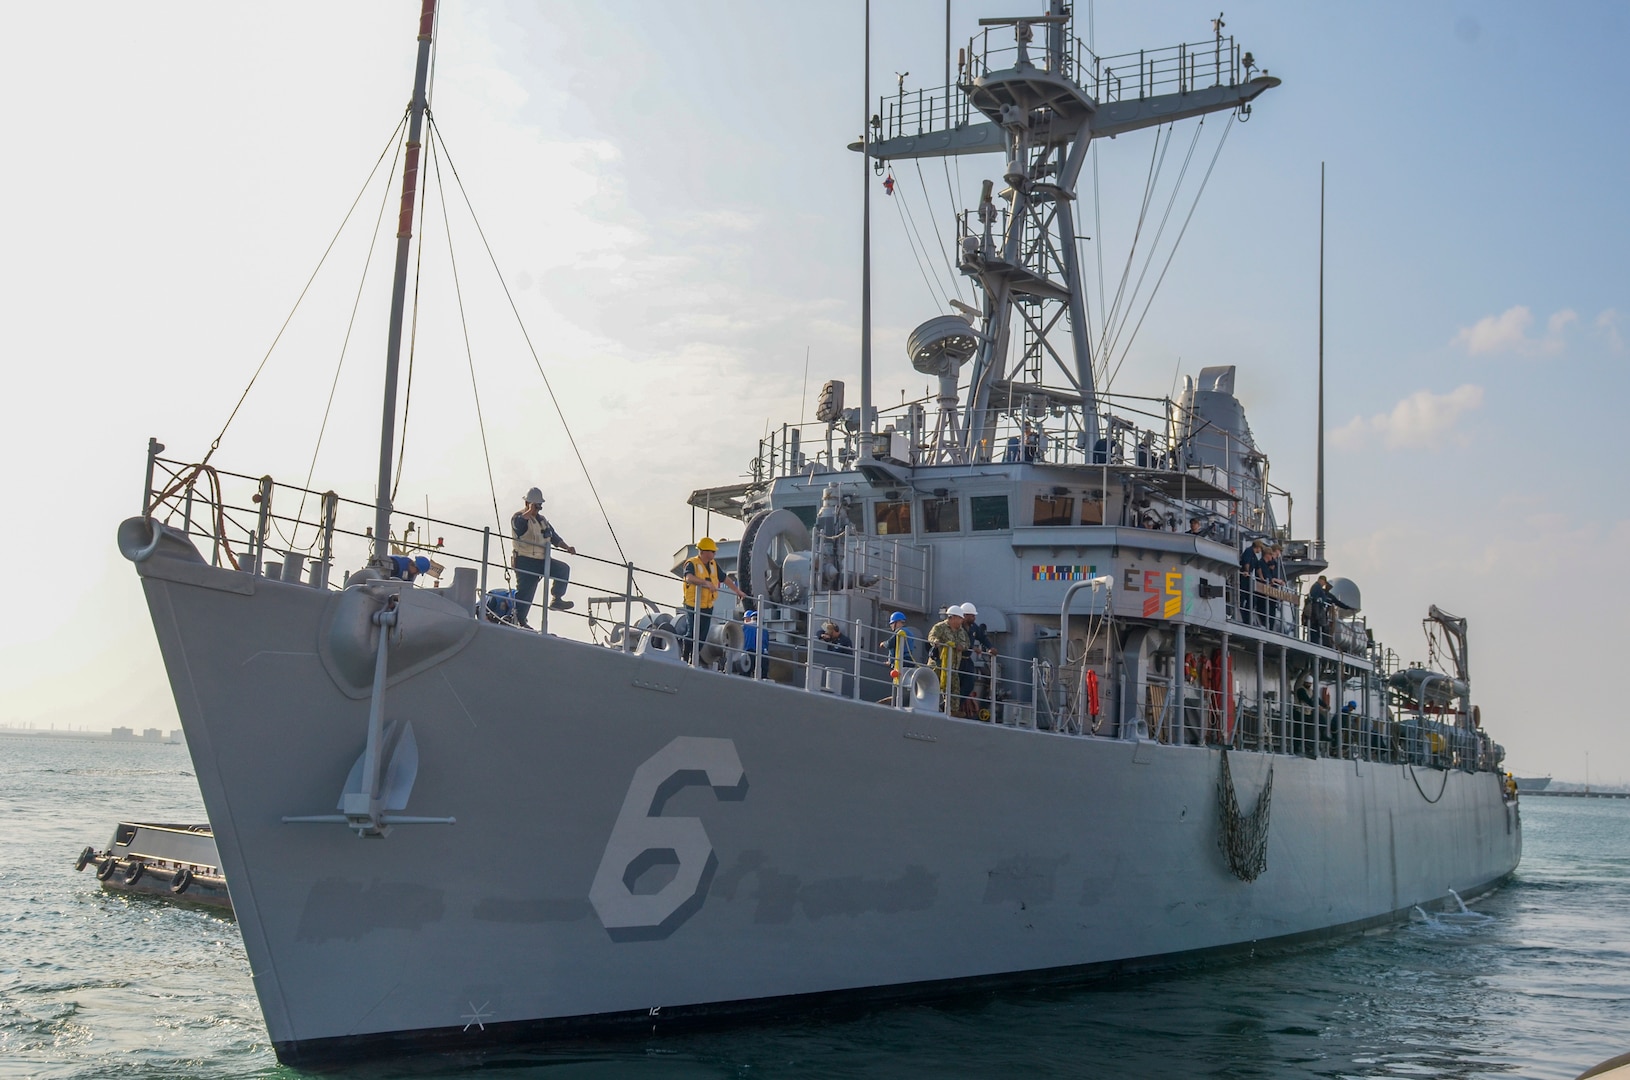 MANAMA, Bahrain (Dec. 17, 2023) U.S. Navy Avenger-class mine countermeasures ship USS Devastator (MCM 6) departs Naval Support Activity (NSA) Bahrain for sea trials, Dec. 17. NSA Bahrain enables the forward operations and responsiveness of U.S. and allied forces in support of Navy Region Europe, Africa, Southwest Asia's mission to provide services to the fleet, warfighter and family. (U.S. Navy photo by Mass Communication Specialist 2nd Class MacAdam Kane Weissman)